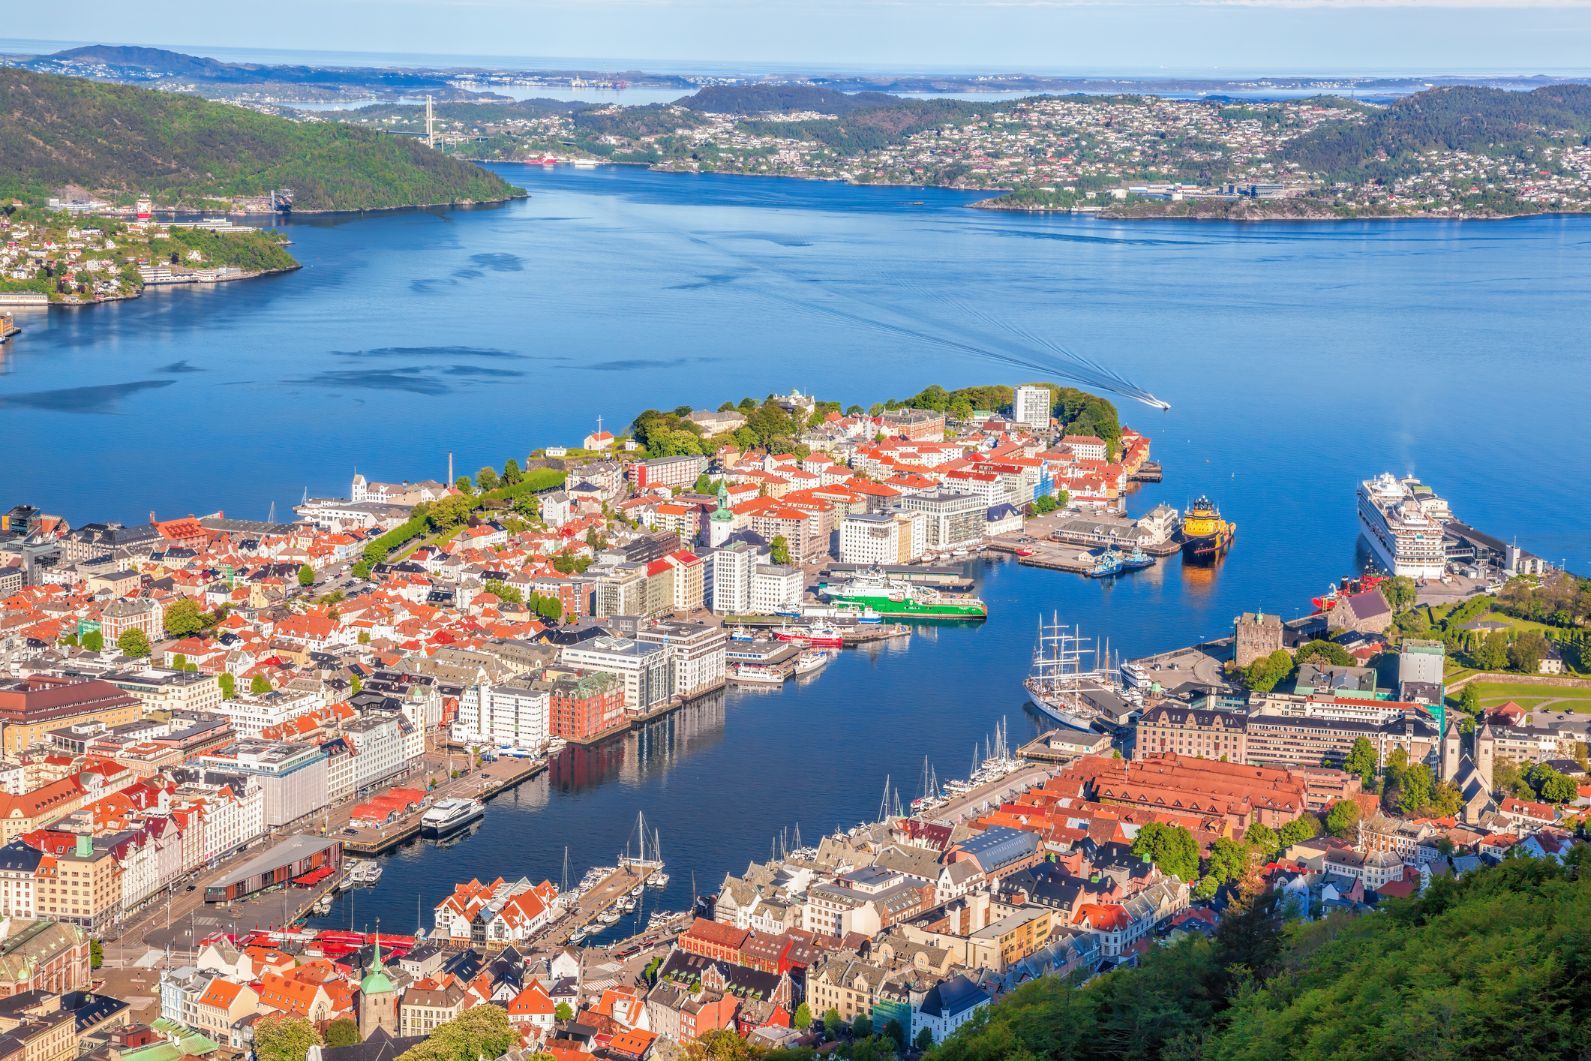 The beautiful view of the city center Bergen and the harbour, from Fløyen and the top of the funicular ride.